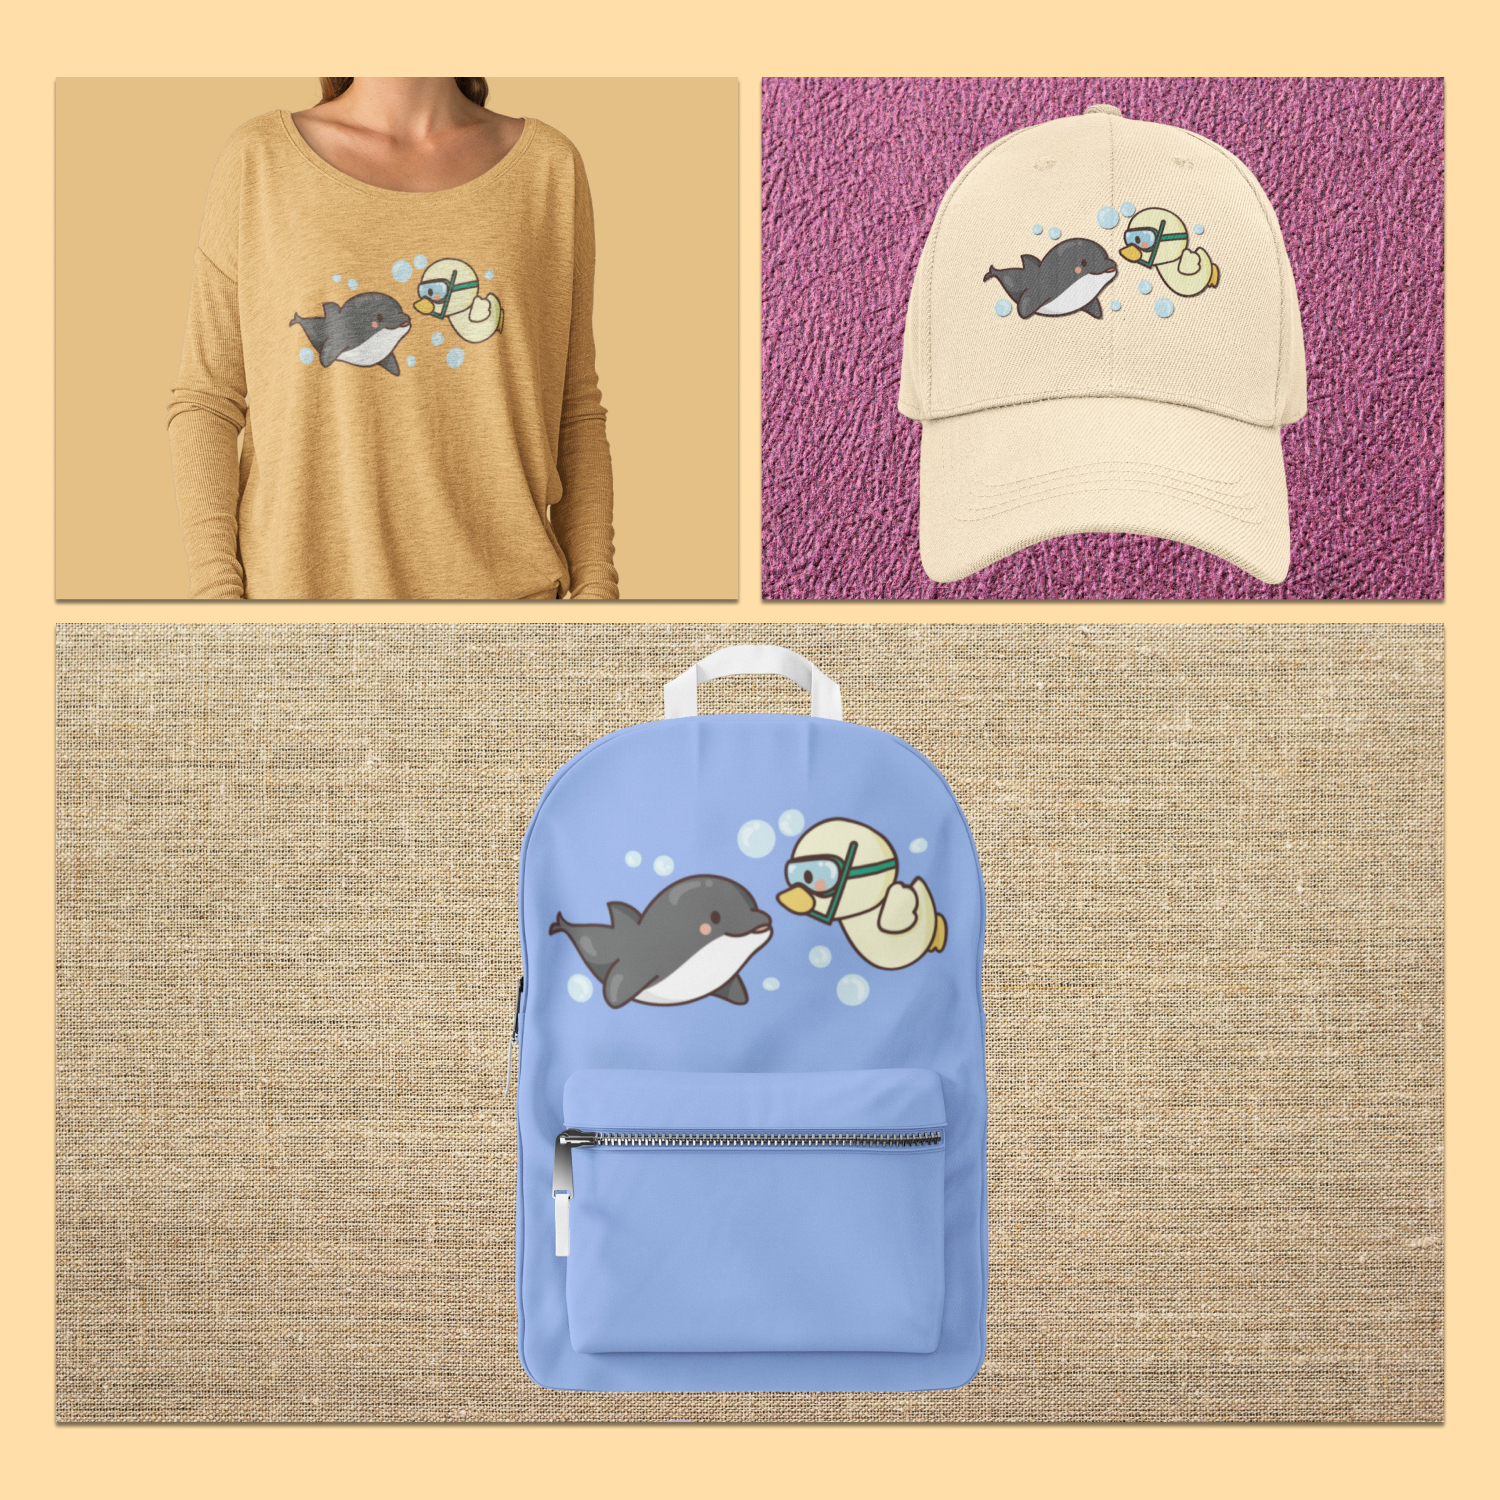 Woman wearing a hat and a backpack with a penguin on it.